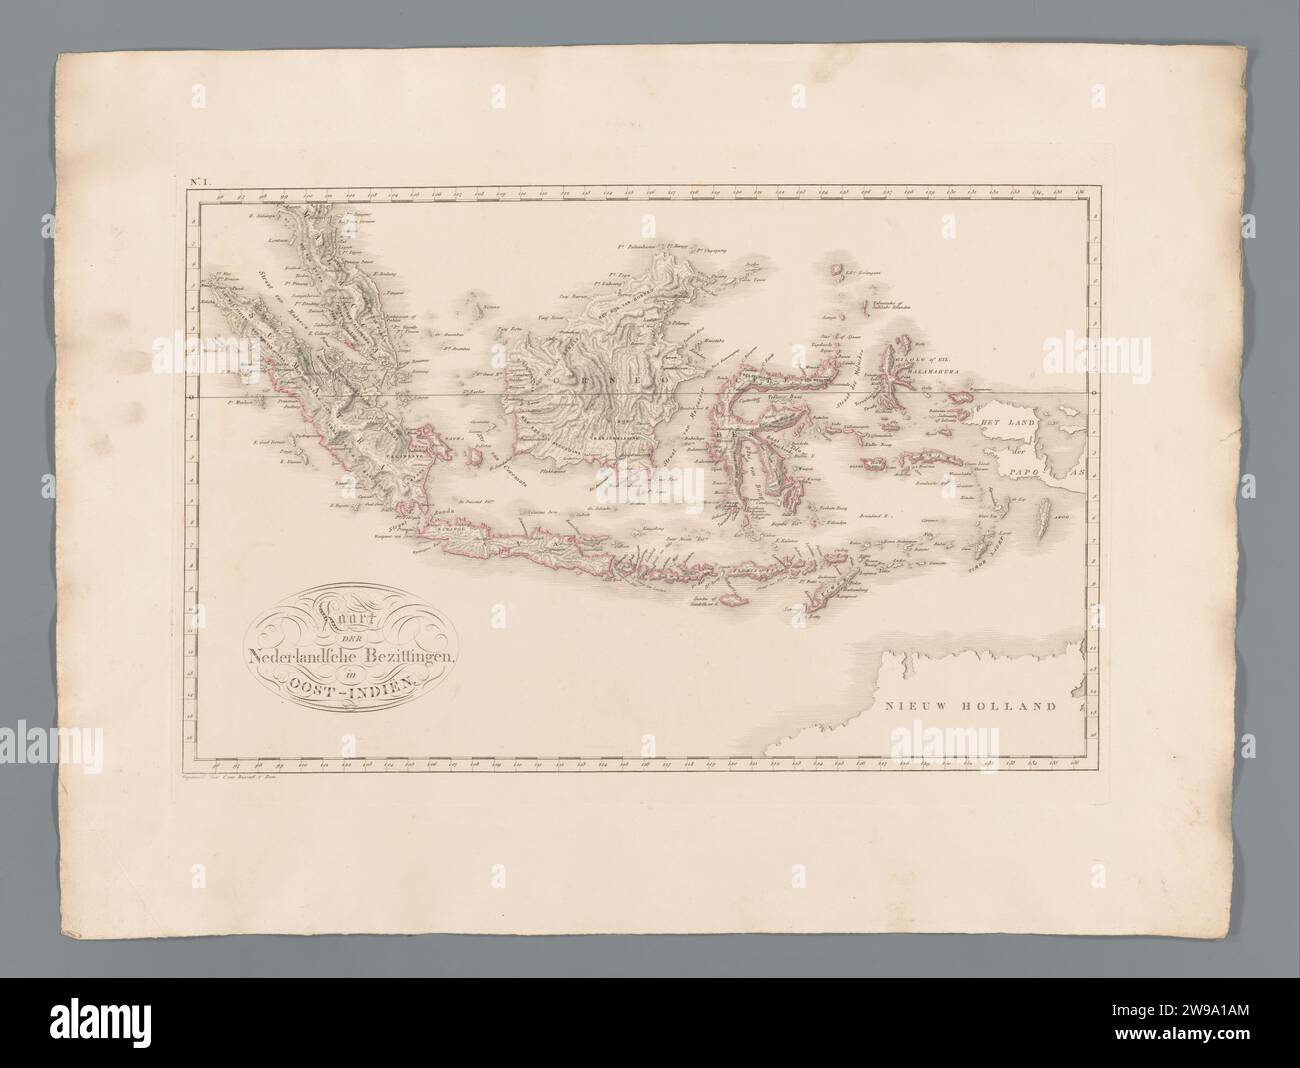 Map of Indonesia, with Sumatra, Borneo, Celebes and part of Malaysia, C. van Baarsel and Son, 1818 print Numbered at the top right: I. The Hague paper engraving maps of separate countries or regions Indonesia Stock Photo